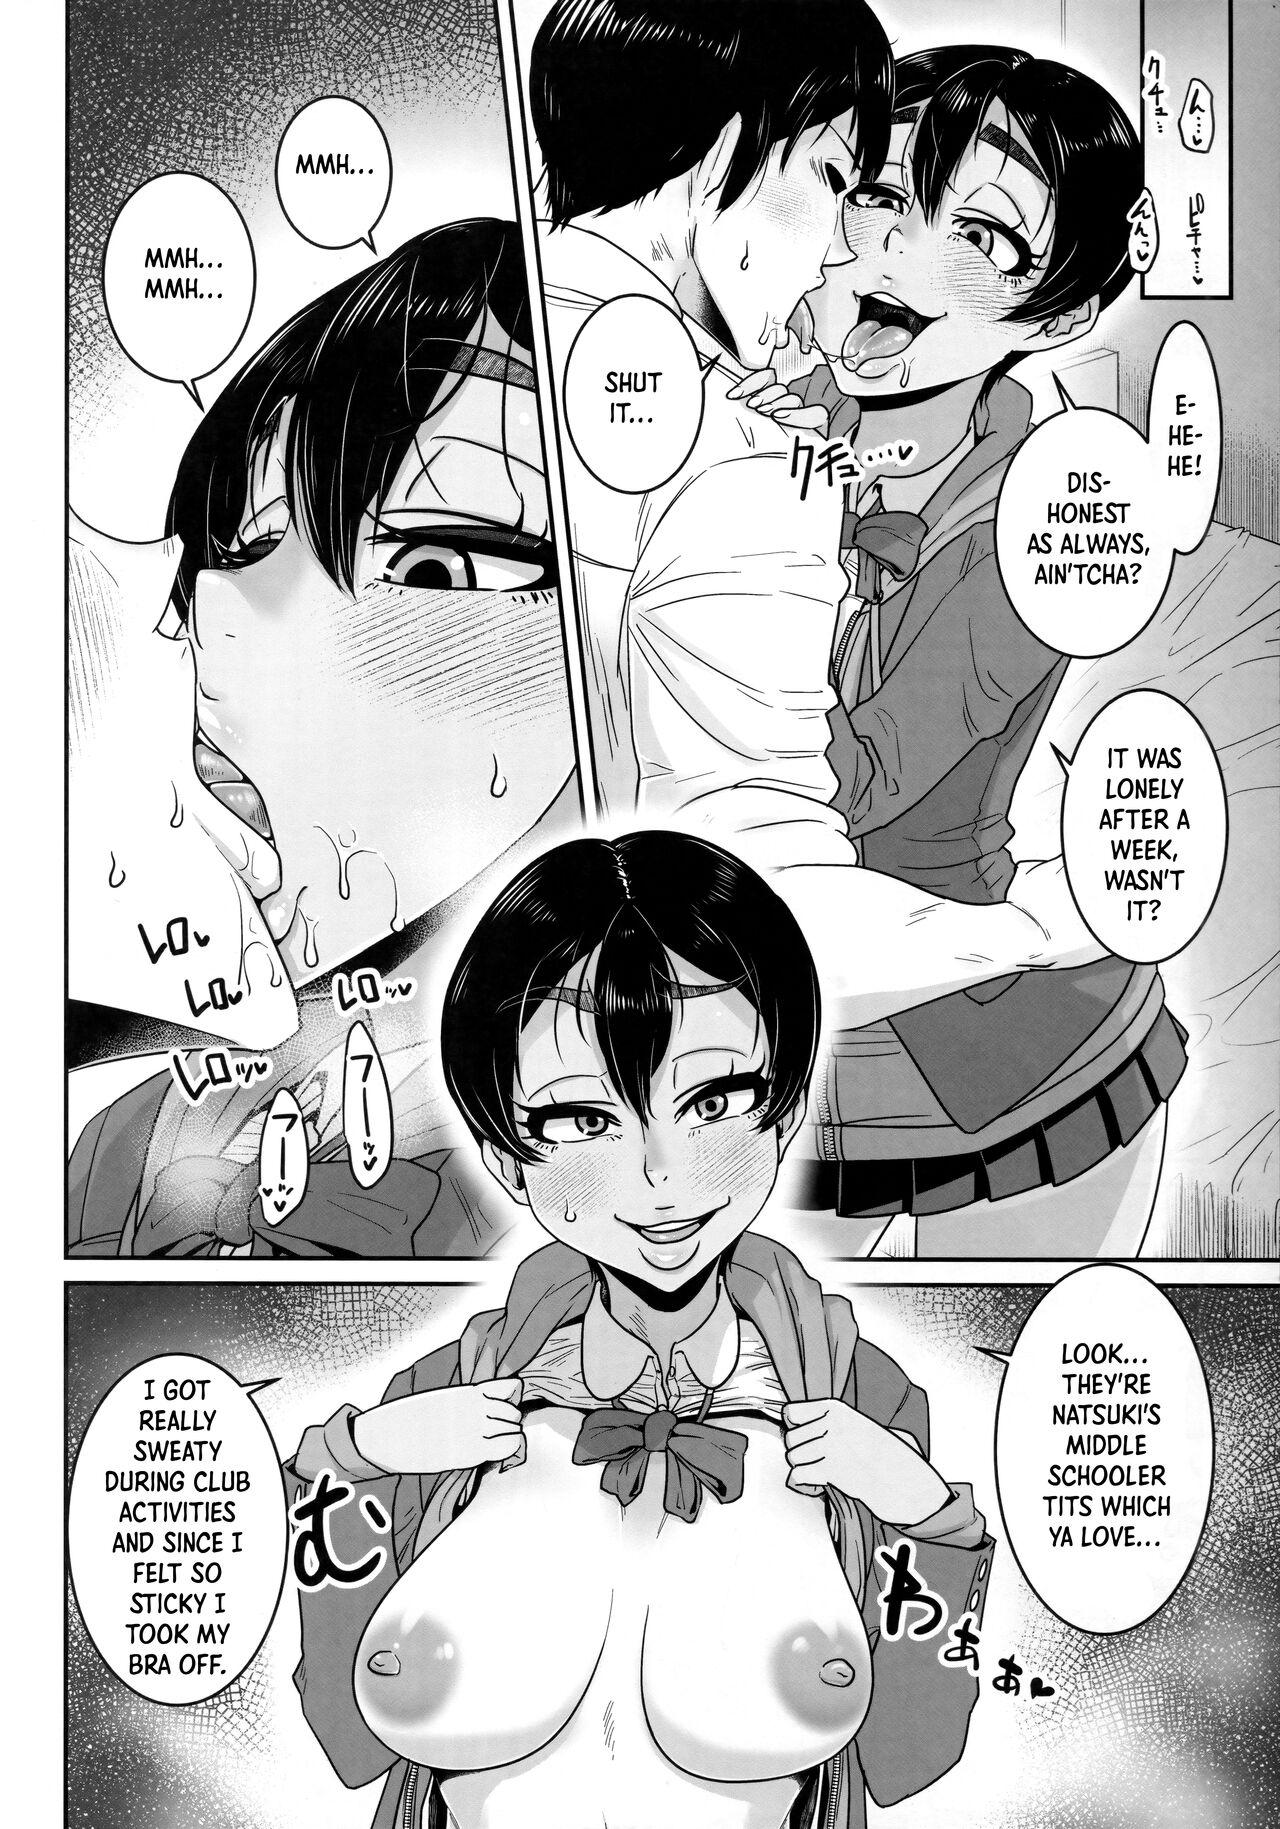 Strapon (C101) [Hachimidosan (Toge Toge)] SeFri Ijou Koibito Miman ~Rikujoubu JC Hen~ | More Than a Fuck-Buddy, Less Than a Lover ~The Middle School Running Club Chick~ [English] [ChudTL] - Original Whore - Page 3